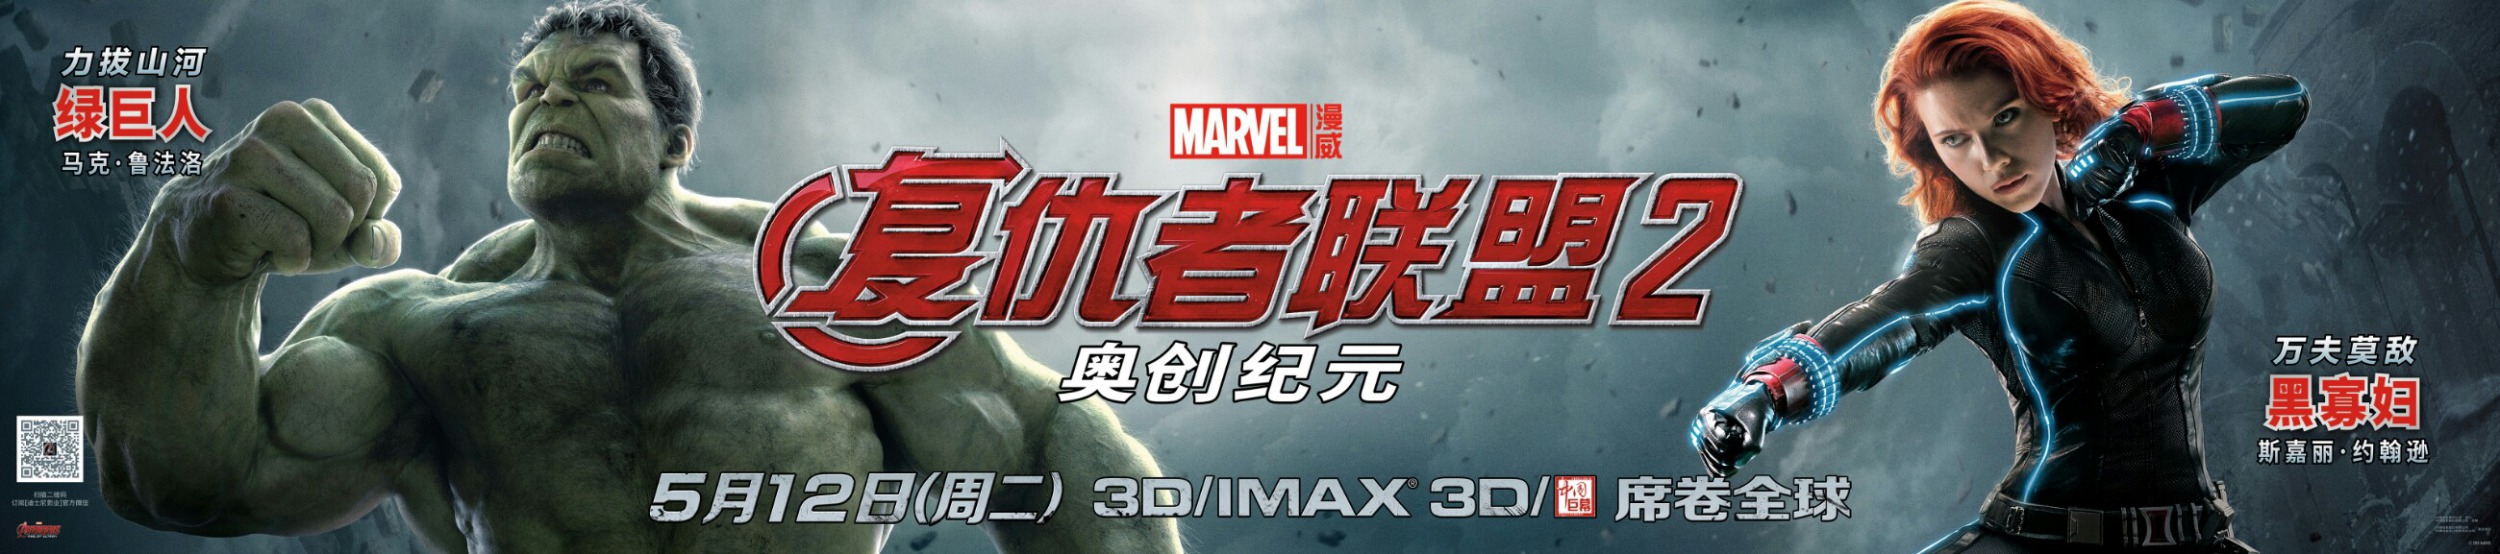 Mega Sized Movie Poster Image for Avengers: Age of Ultron (#31 of 36)